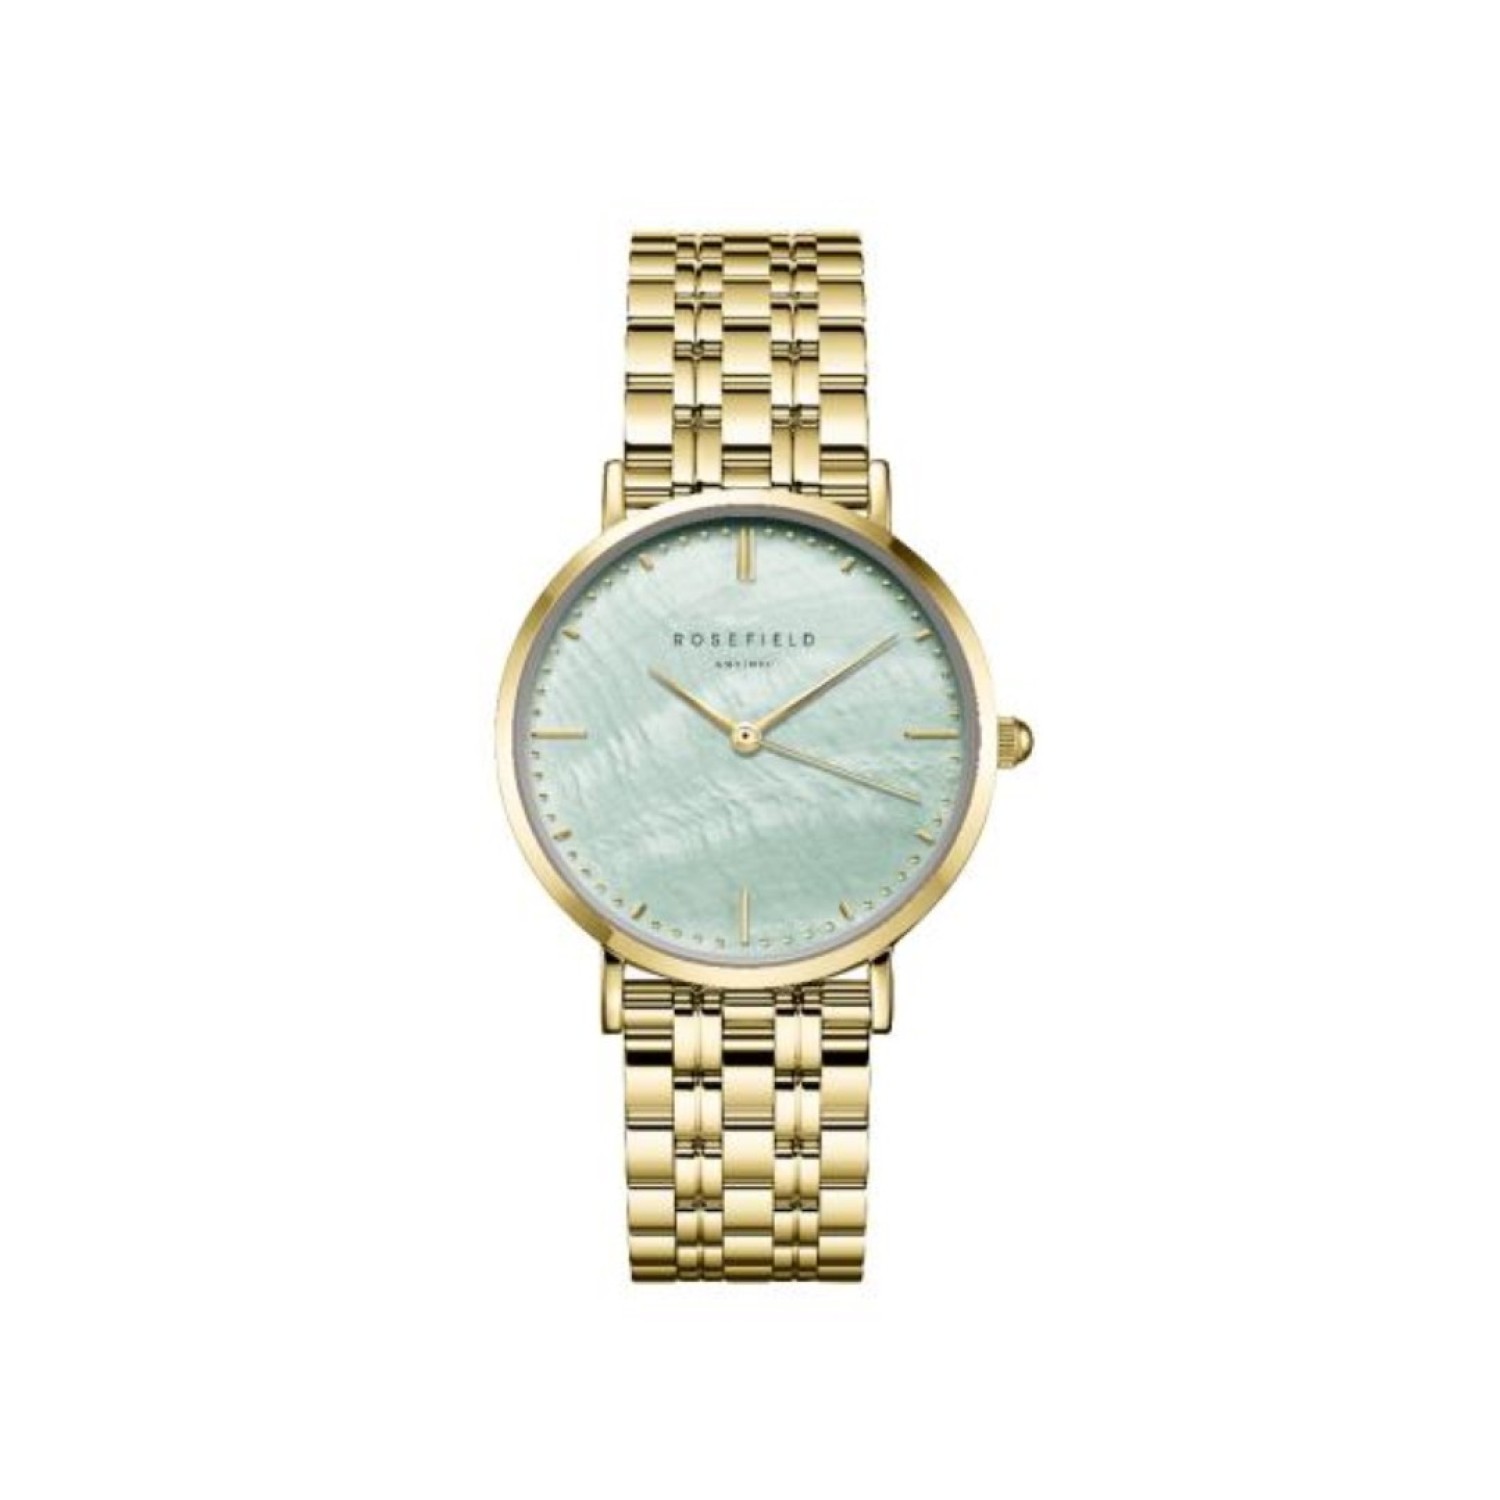 UGGSG-U37 Rosefield Gold UPPER EAST SIDE Mint Green Dial Watch UGGSG-U37 Rosefield Watches Auckland | With their stylish designs and packaging, Rosefield watches make excellent gifts for special occasions.